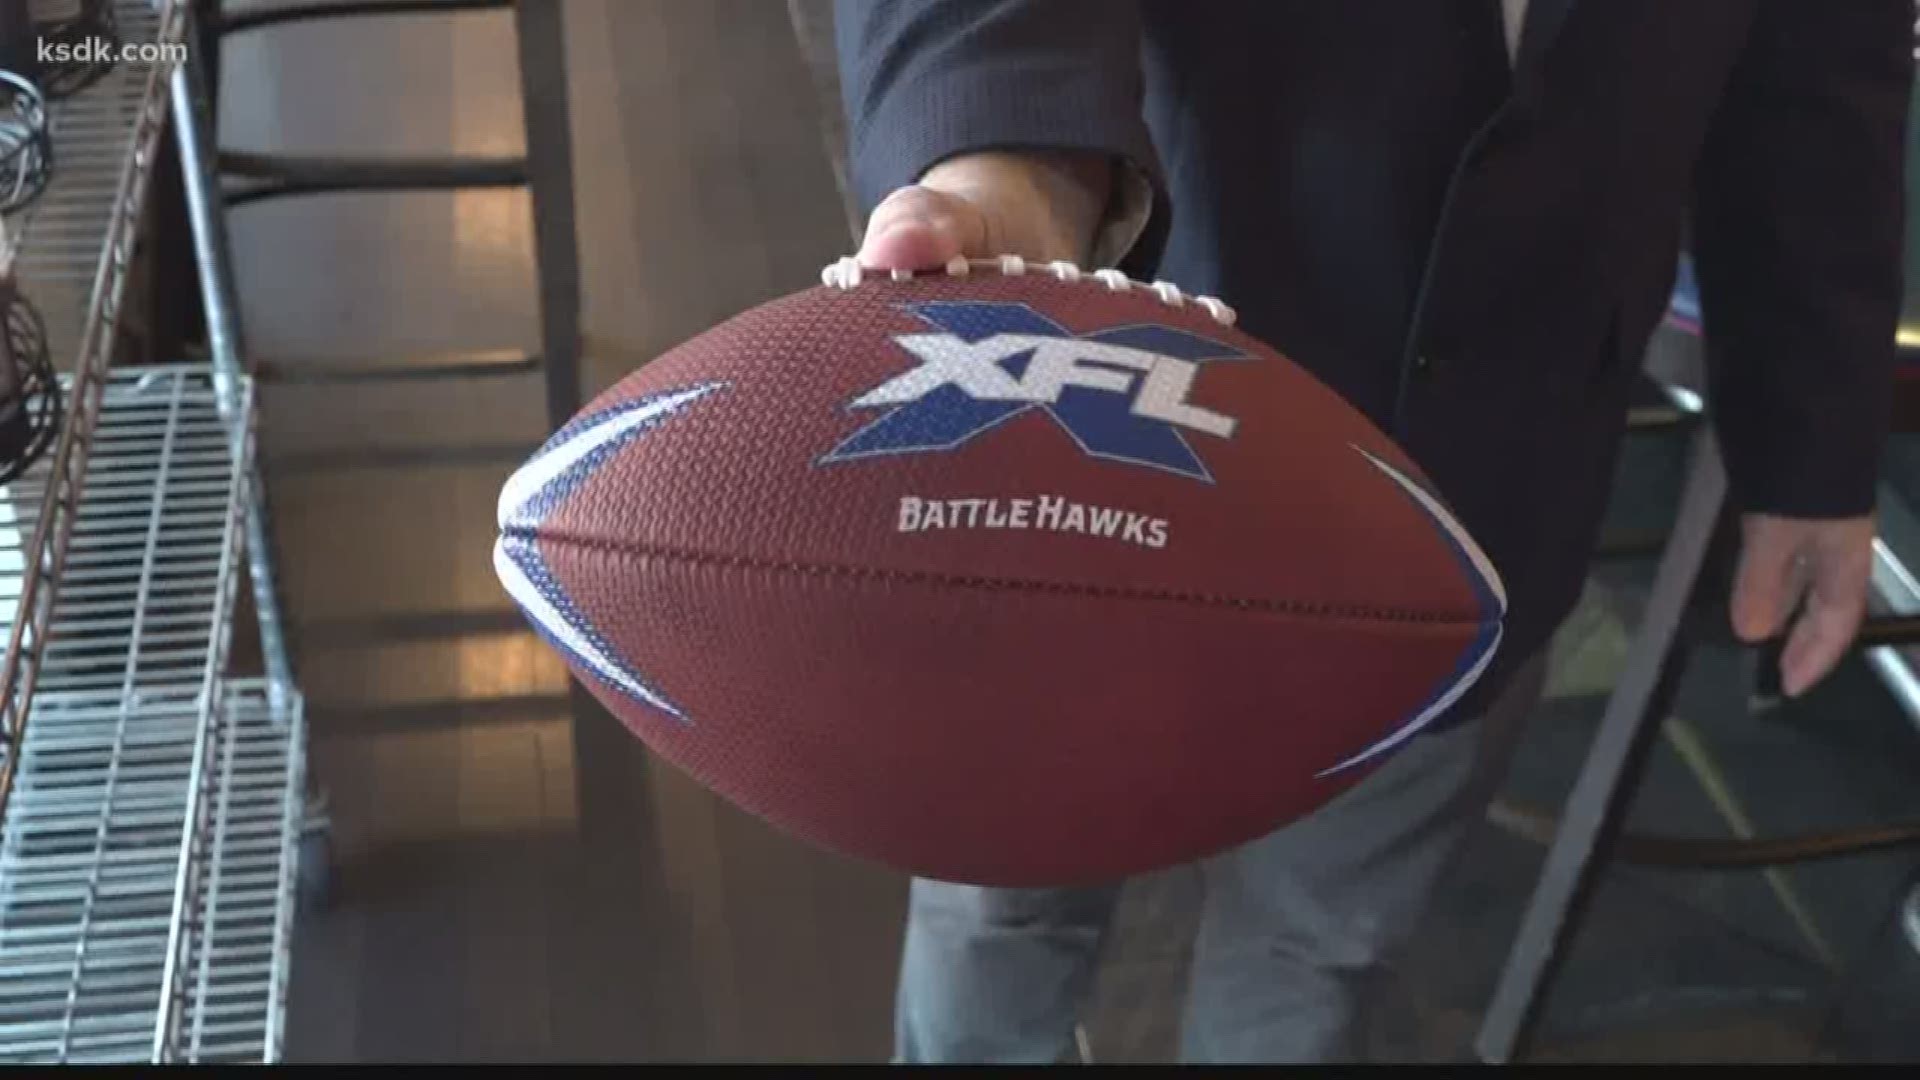 Each team in the XFL will have their own unique ball.